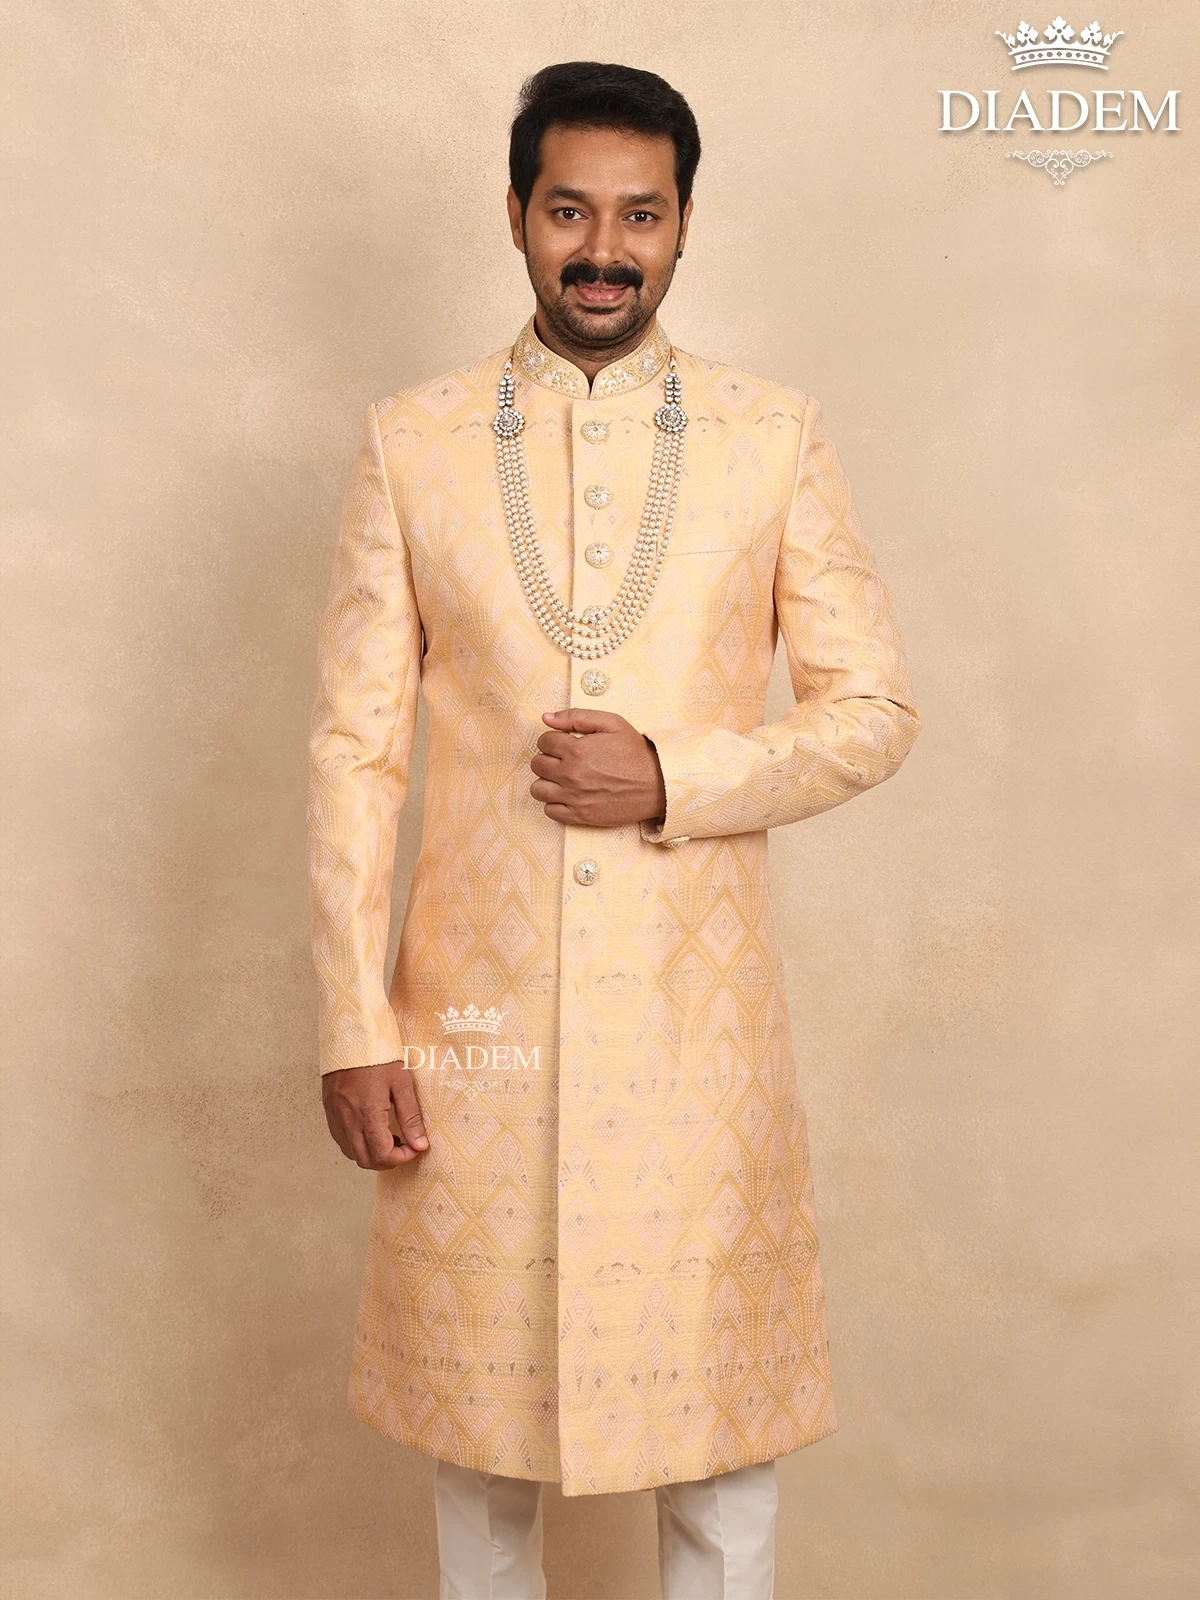 Sandal Jacquard Sherwani Suit Adorned With Embossed Details, Paired With Bead Mala